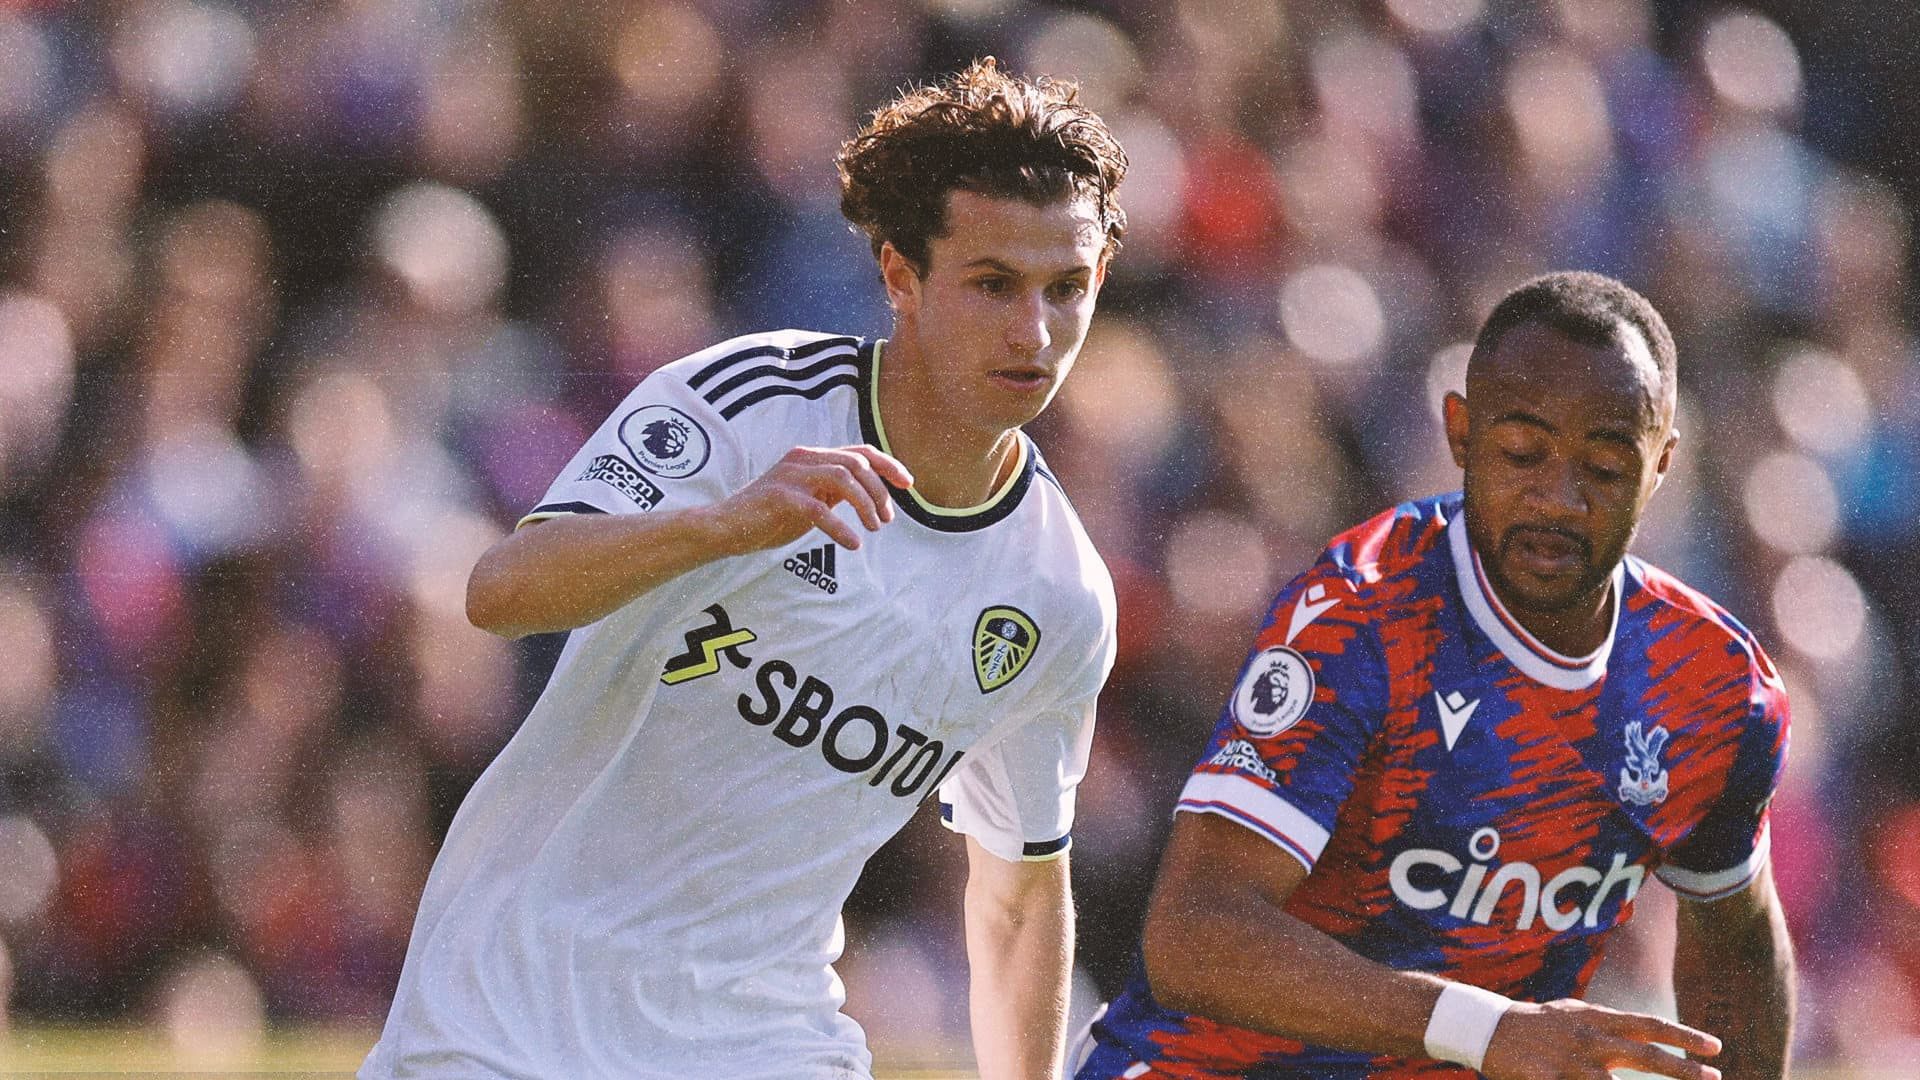 Brenden Aaronson on the ball at Selhurst Park, doing some cool stuff no doubt